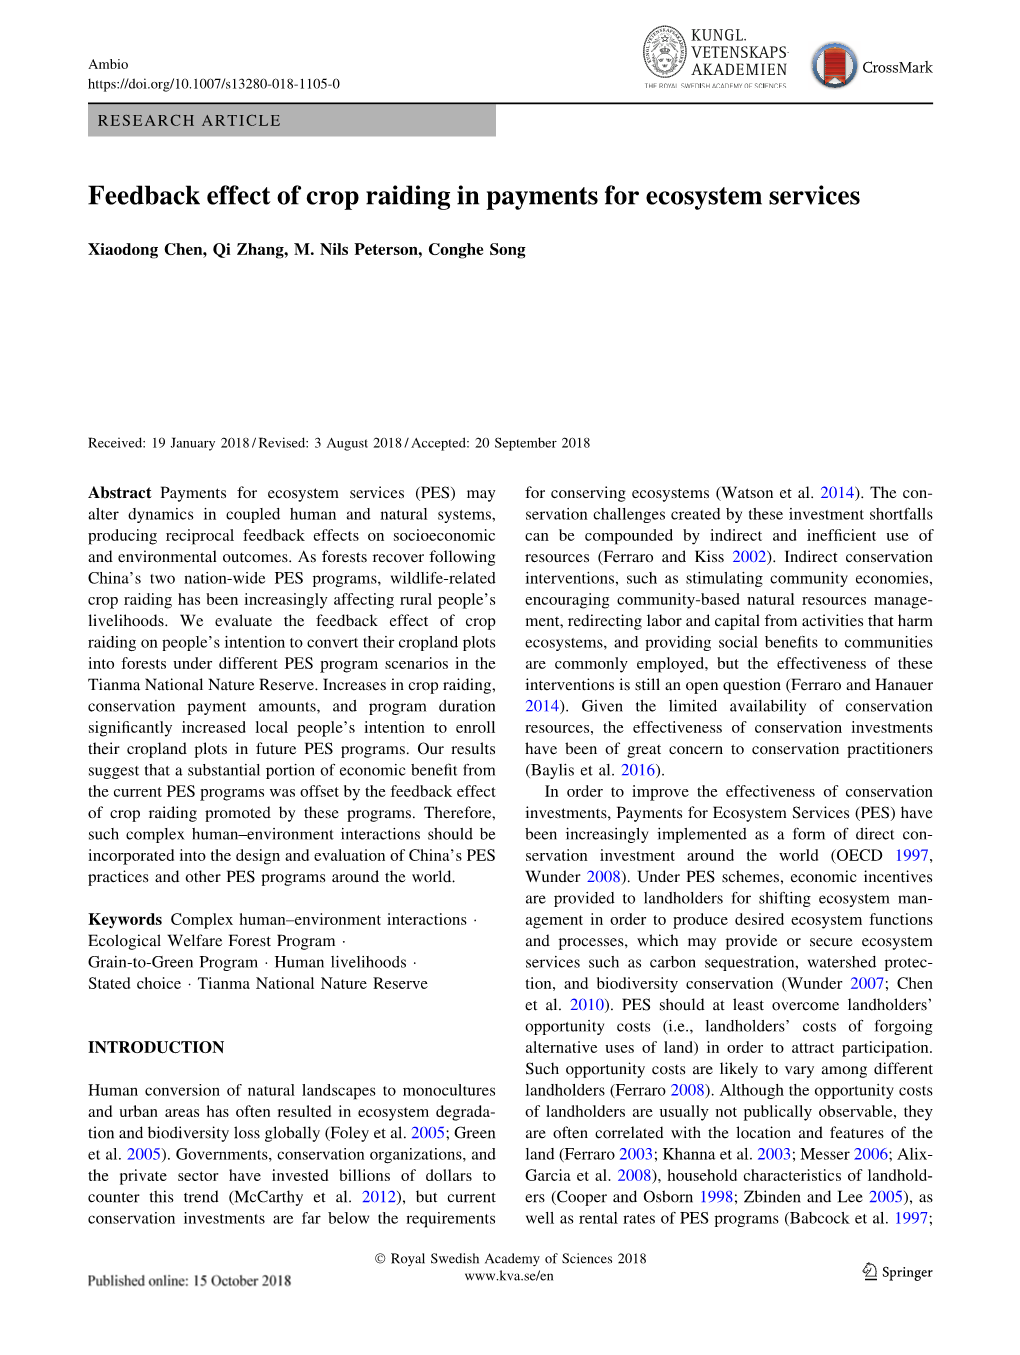 Feedback Effect of Crop Raiding in Payments for Ecosystem Services